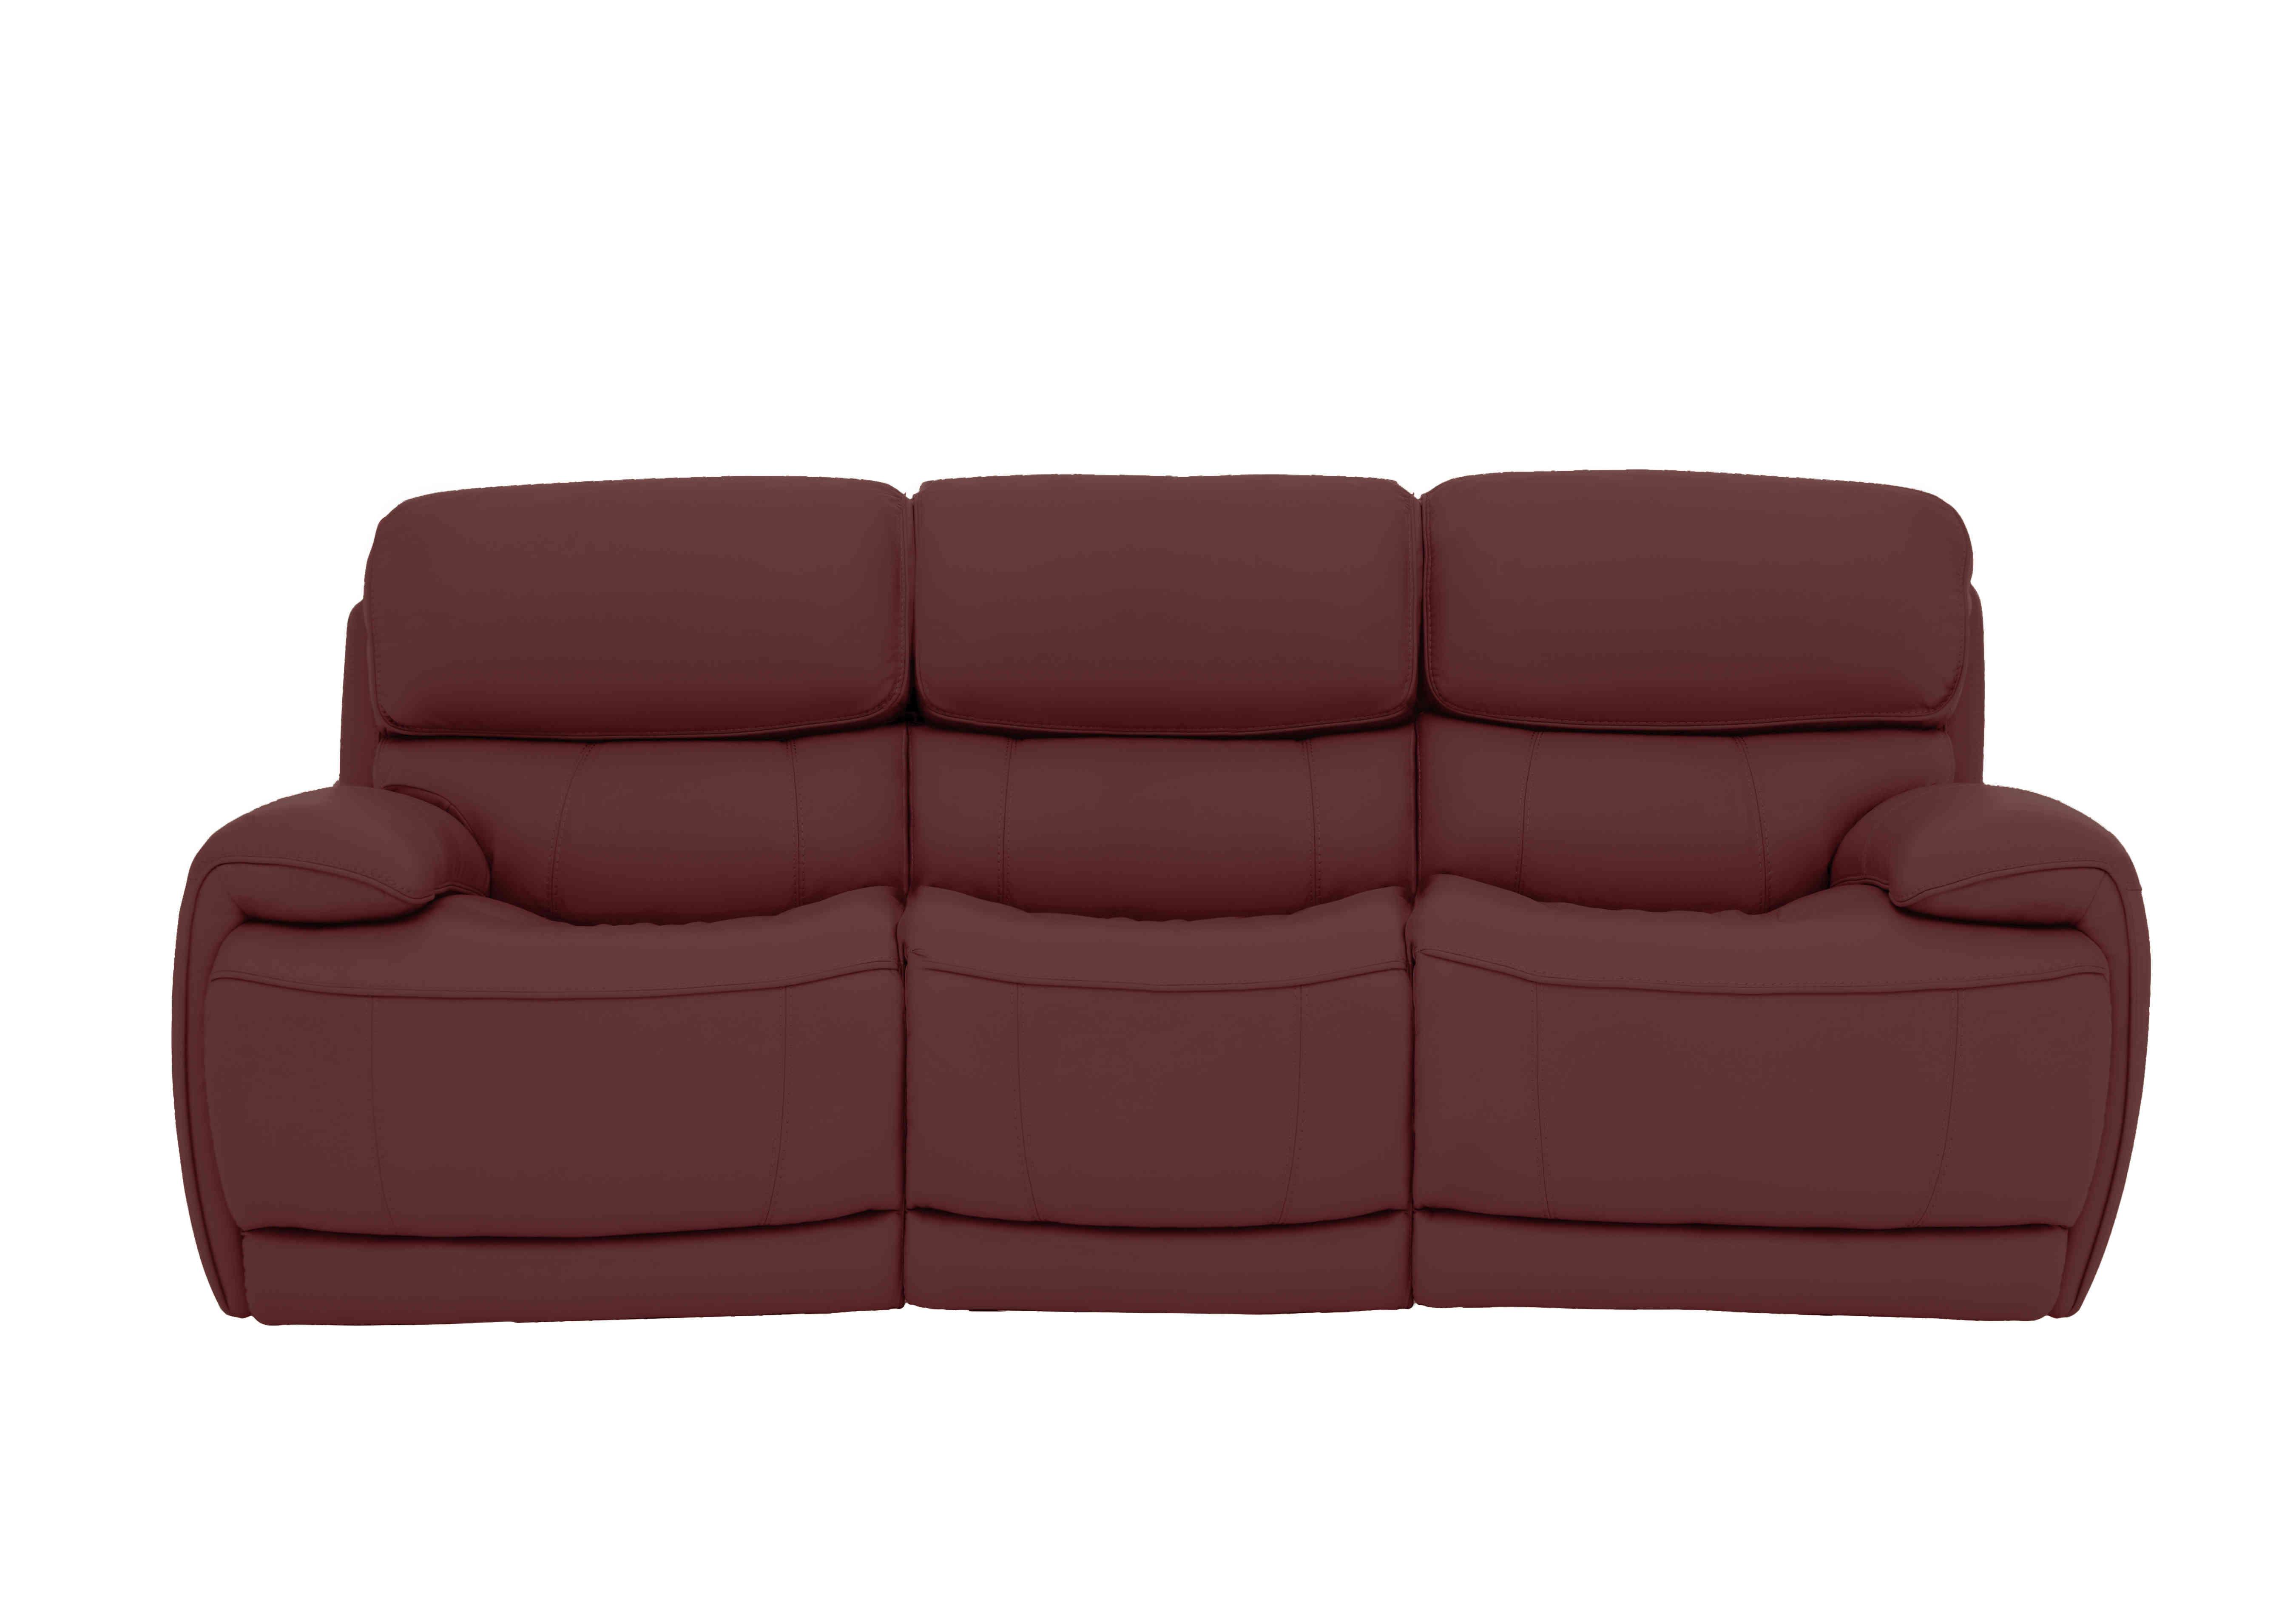 Rocco 3 Seater Leather Power Rocker Sofa with Power Headrests in Bv-035c Deep Red on Furniture Village